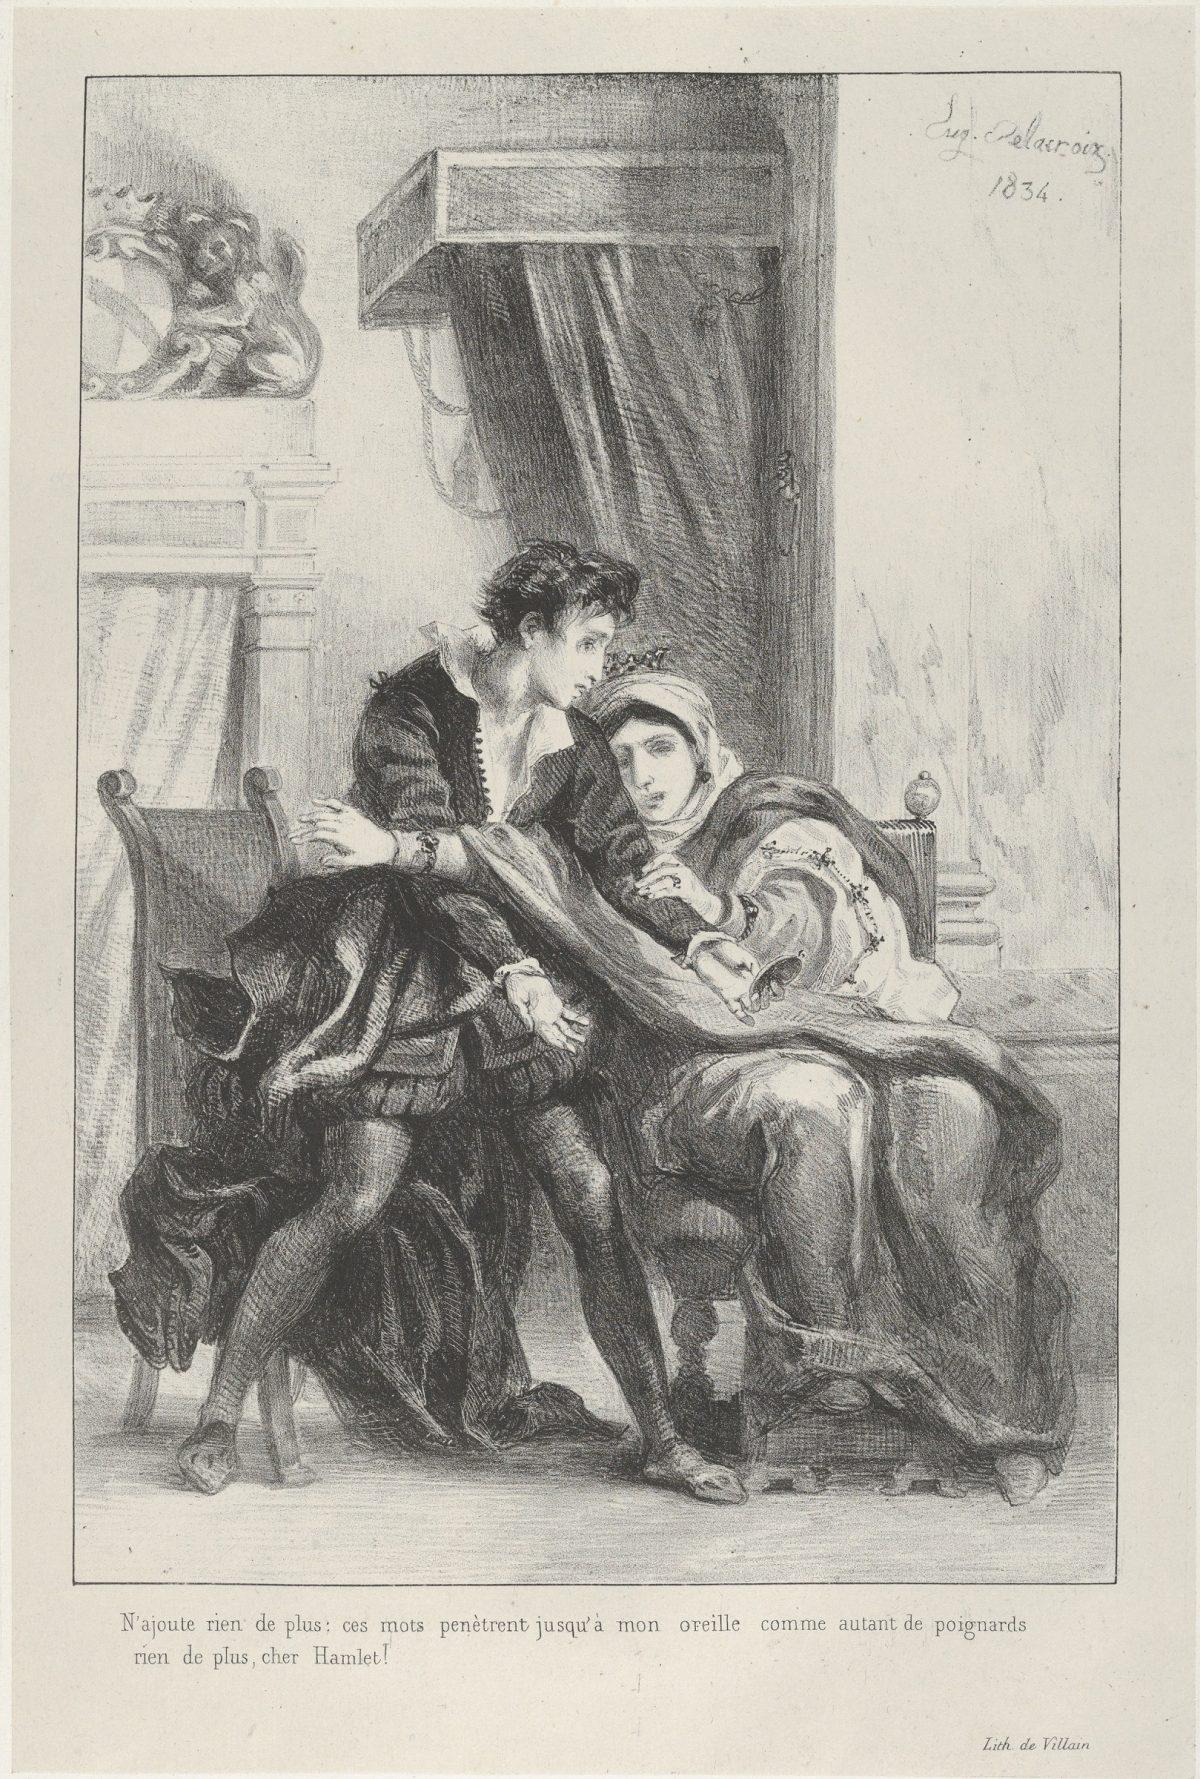 "Hamlet and the Queen," 1834, by Eugène Delacroix (1798–1863). Lithograph, third state of four, 11 7/8 inches by 7 15/16 inches. The Metropolitan Museum of Art, New York, Rogers Fund, 1922. (The Metropolitan Museum of Art)